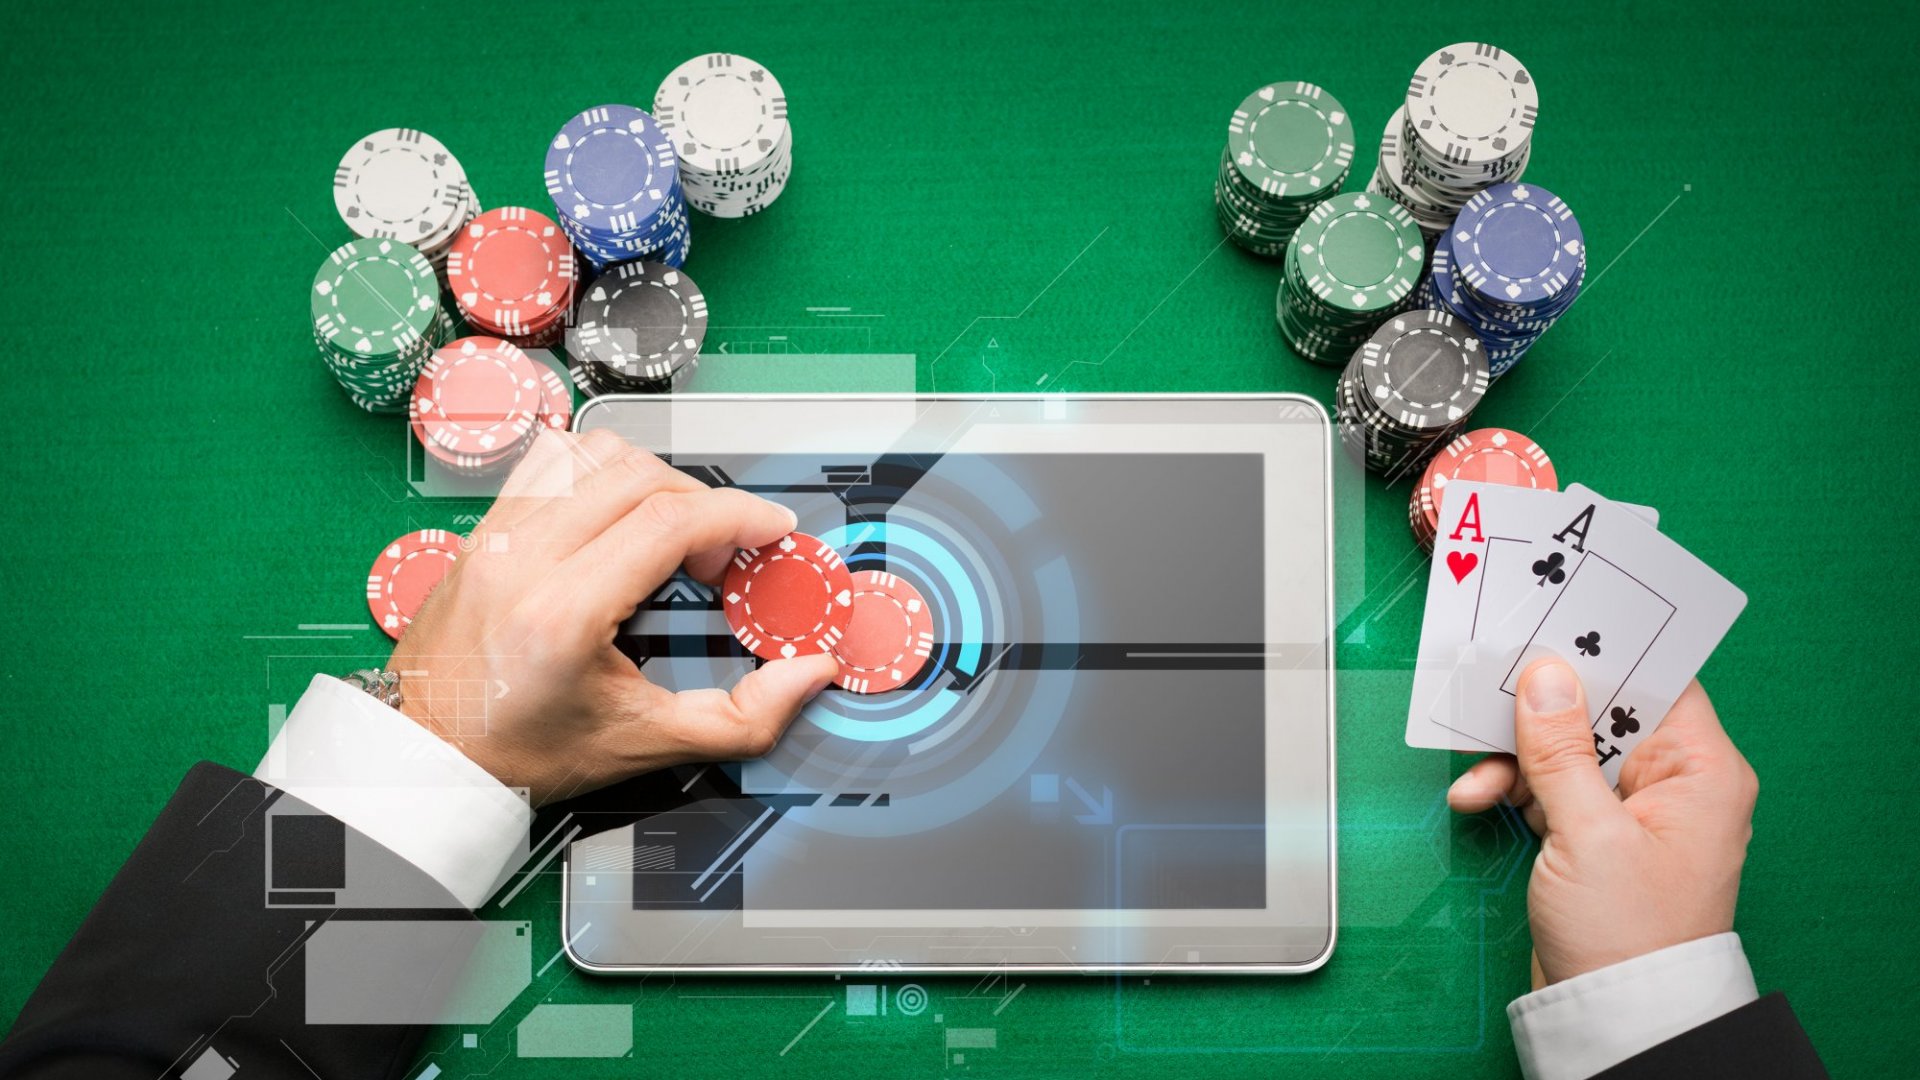 Is Blockchain Technology Used in Online Gambling?